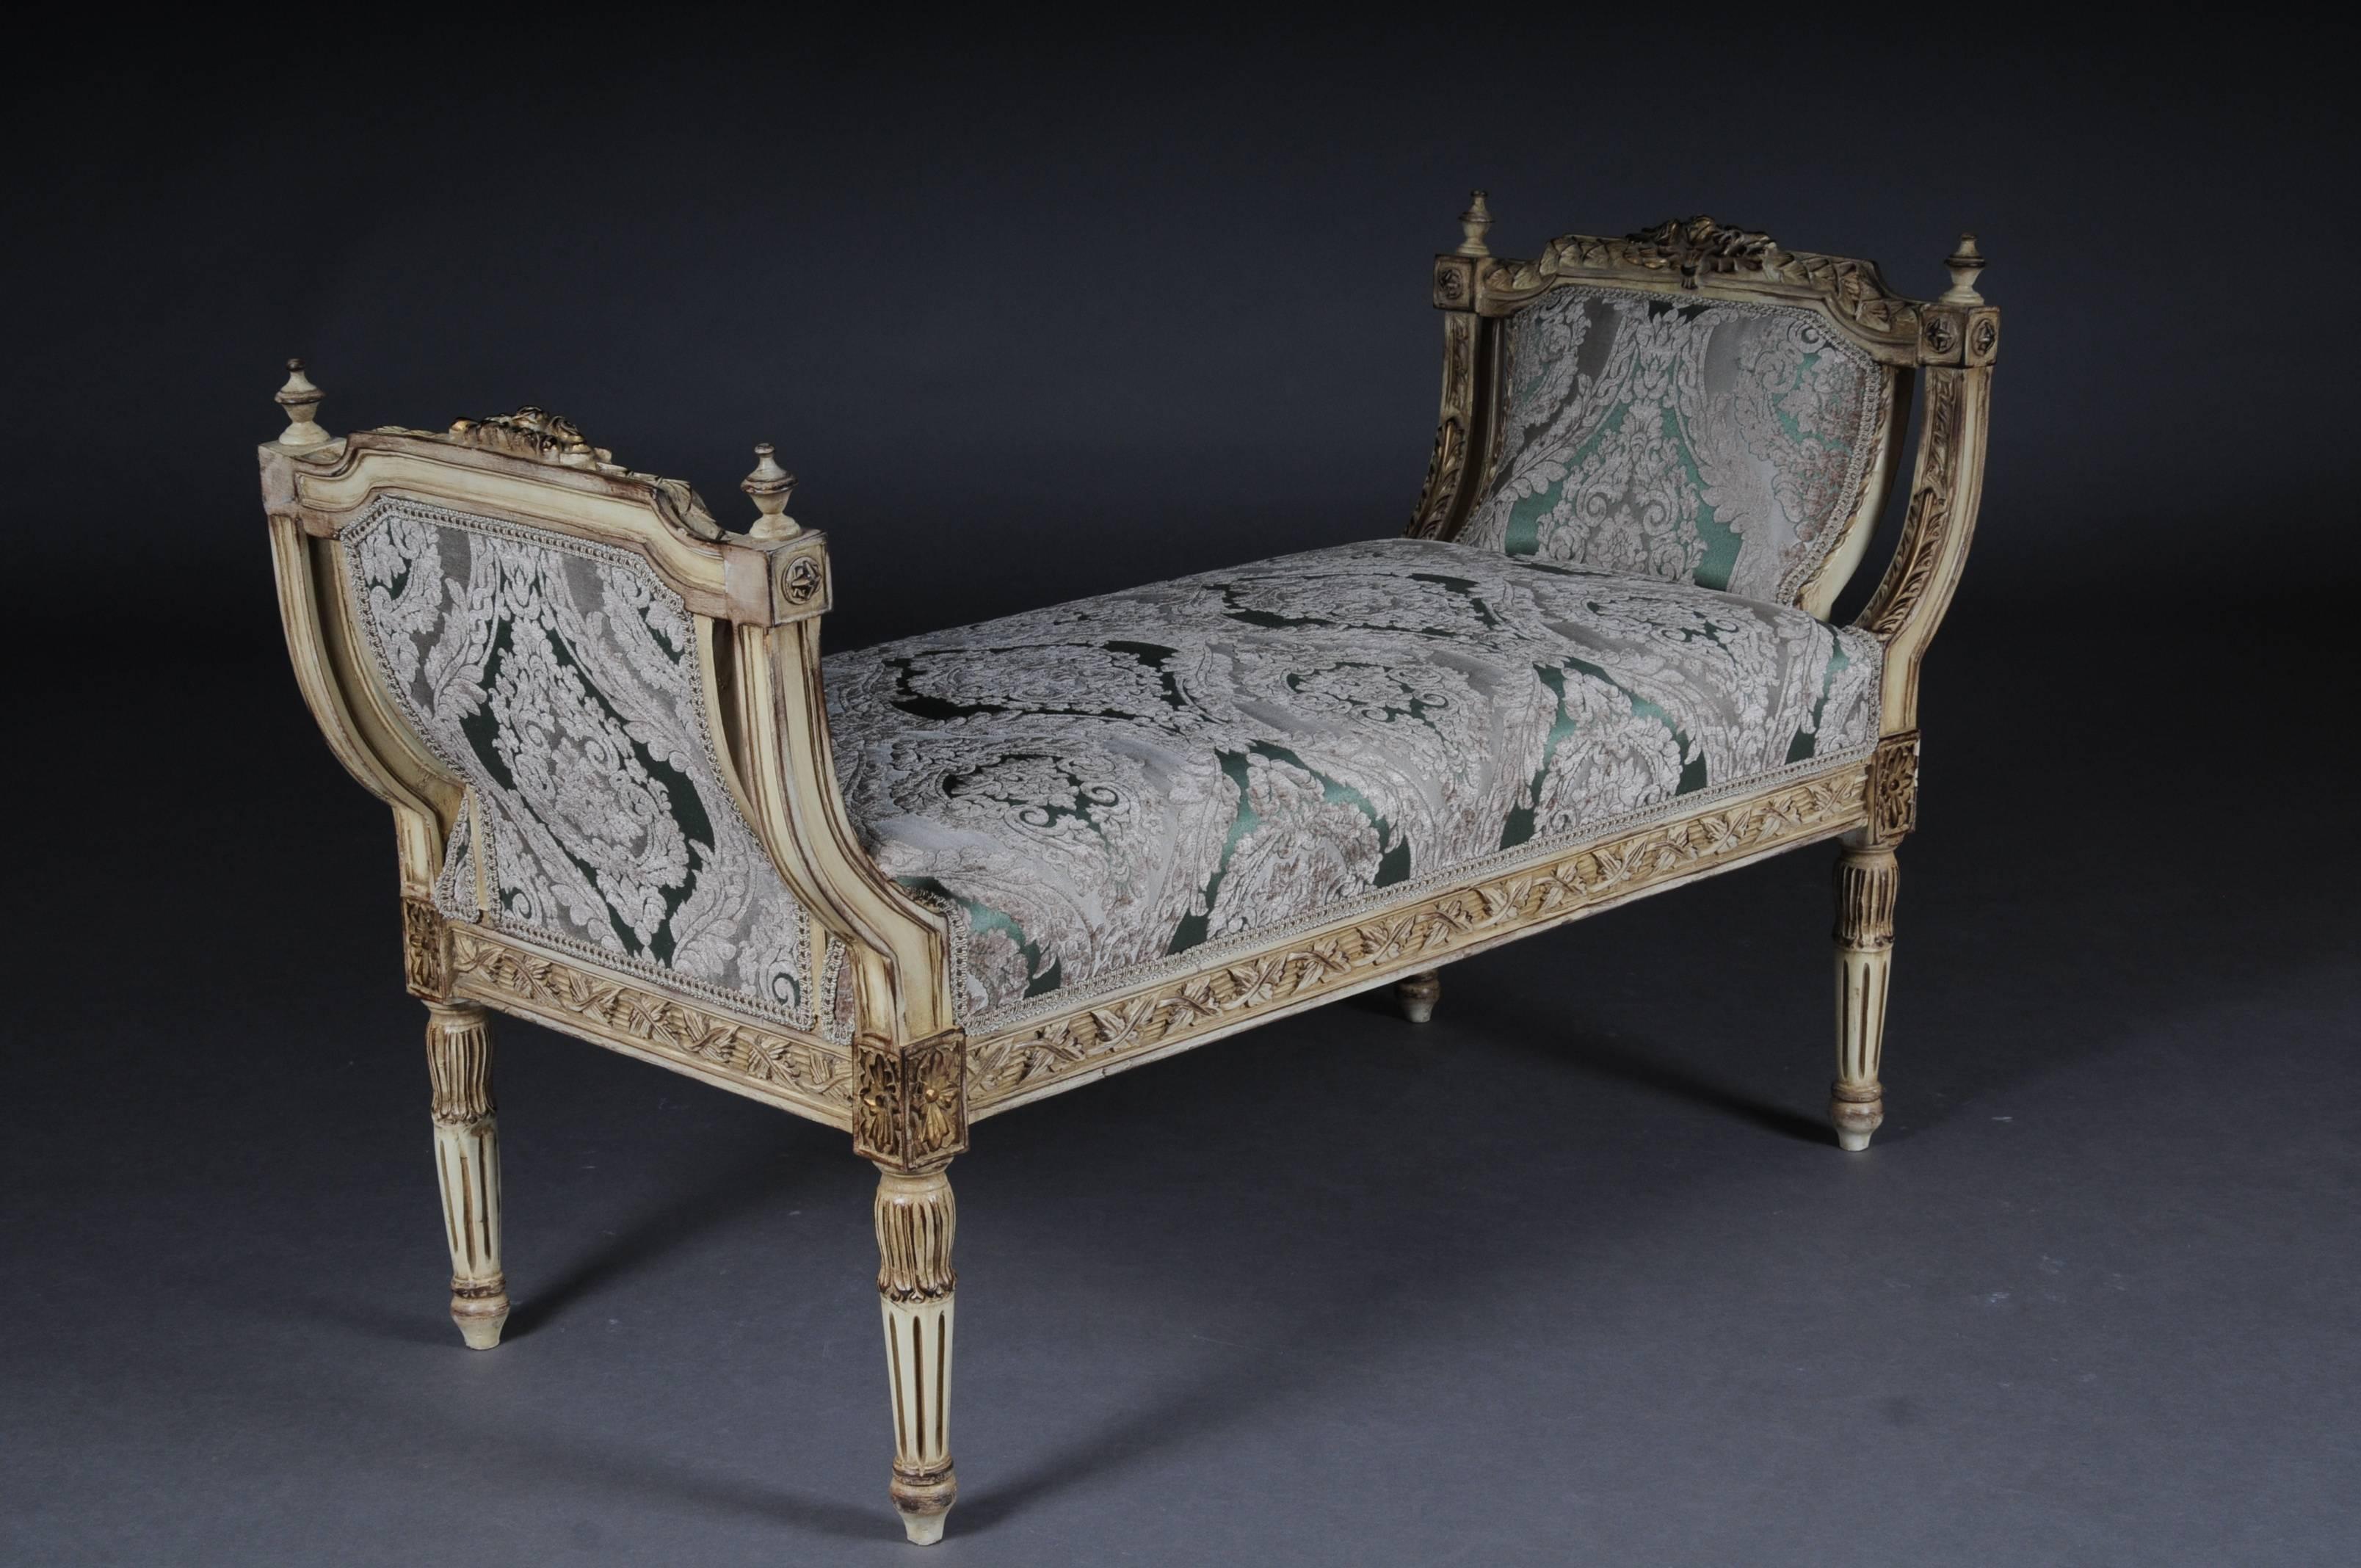 Solid beechwood, gilded with gold trim, straight frame on four conical, fluted legs. The seat is finished with a historical, Classic upholstery.

(B-Dom-84).